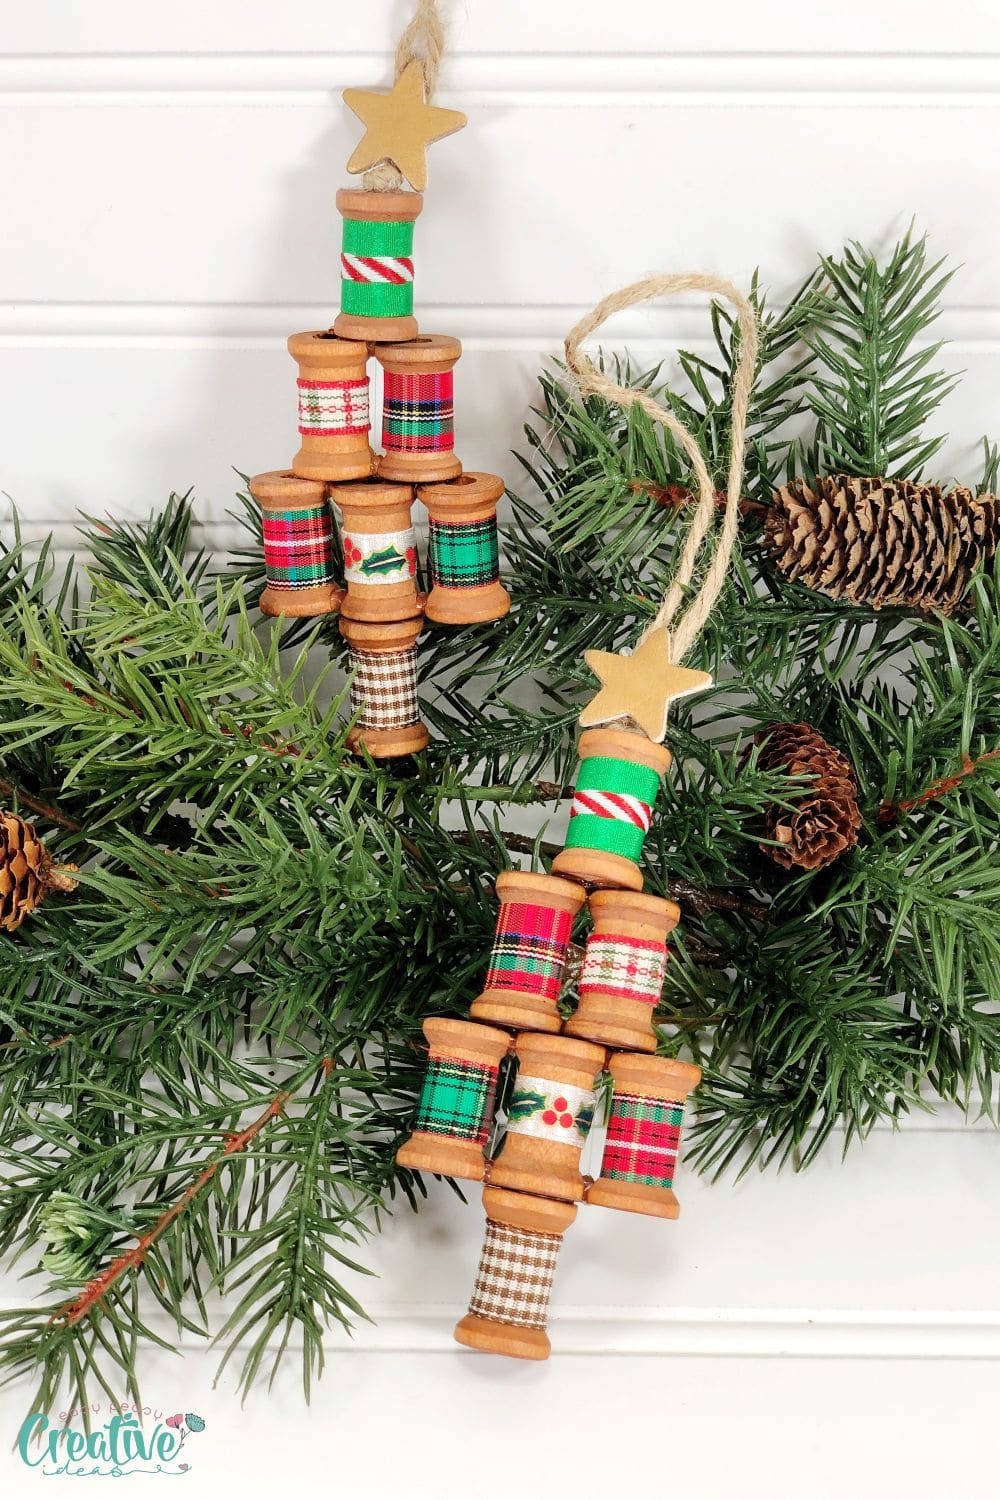 Wooden spool ornaments in a Christmas tree